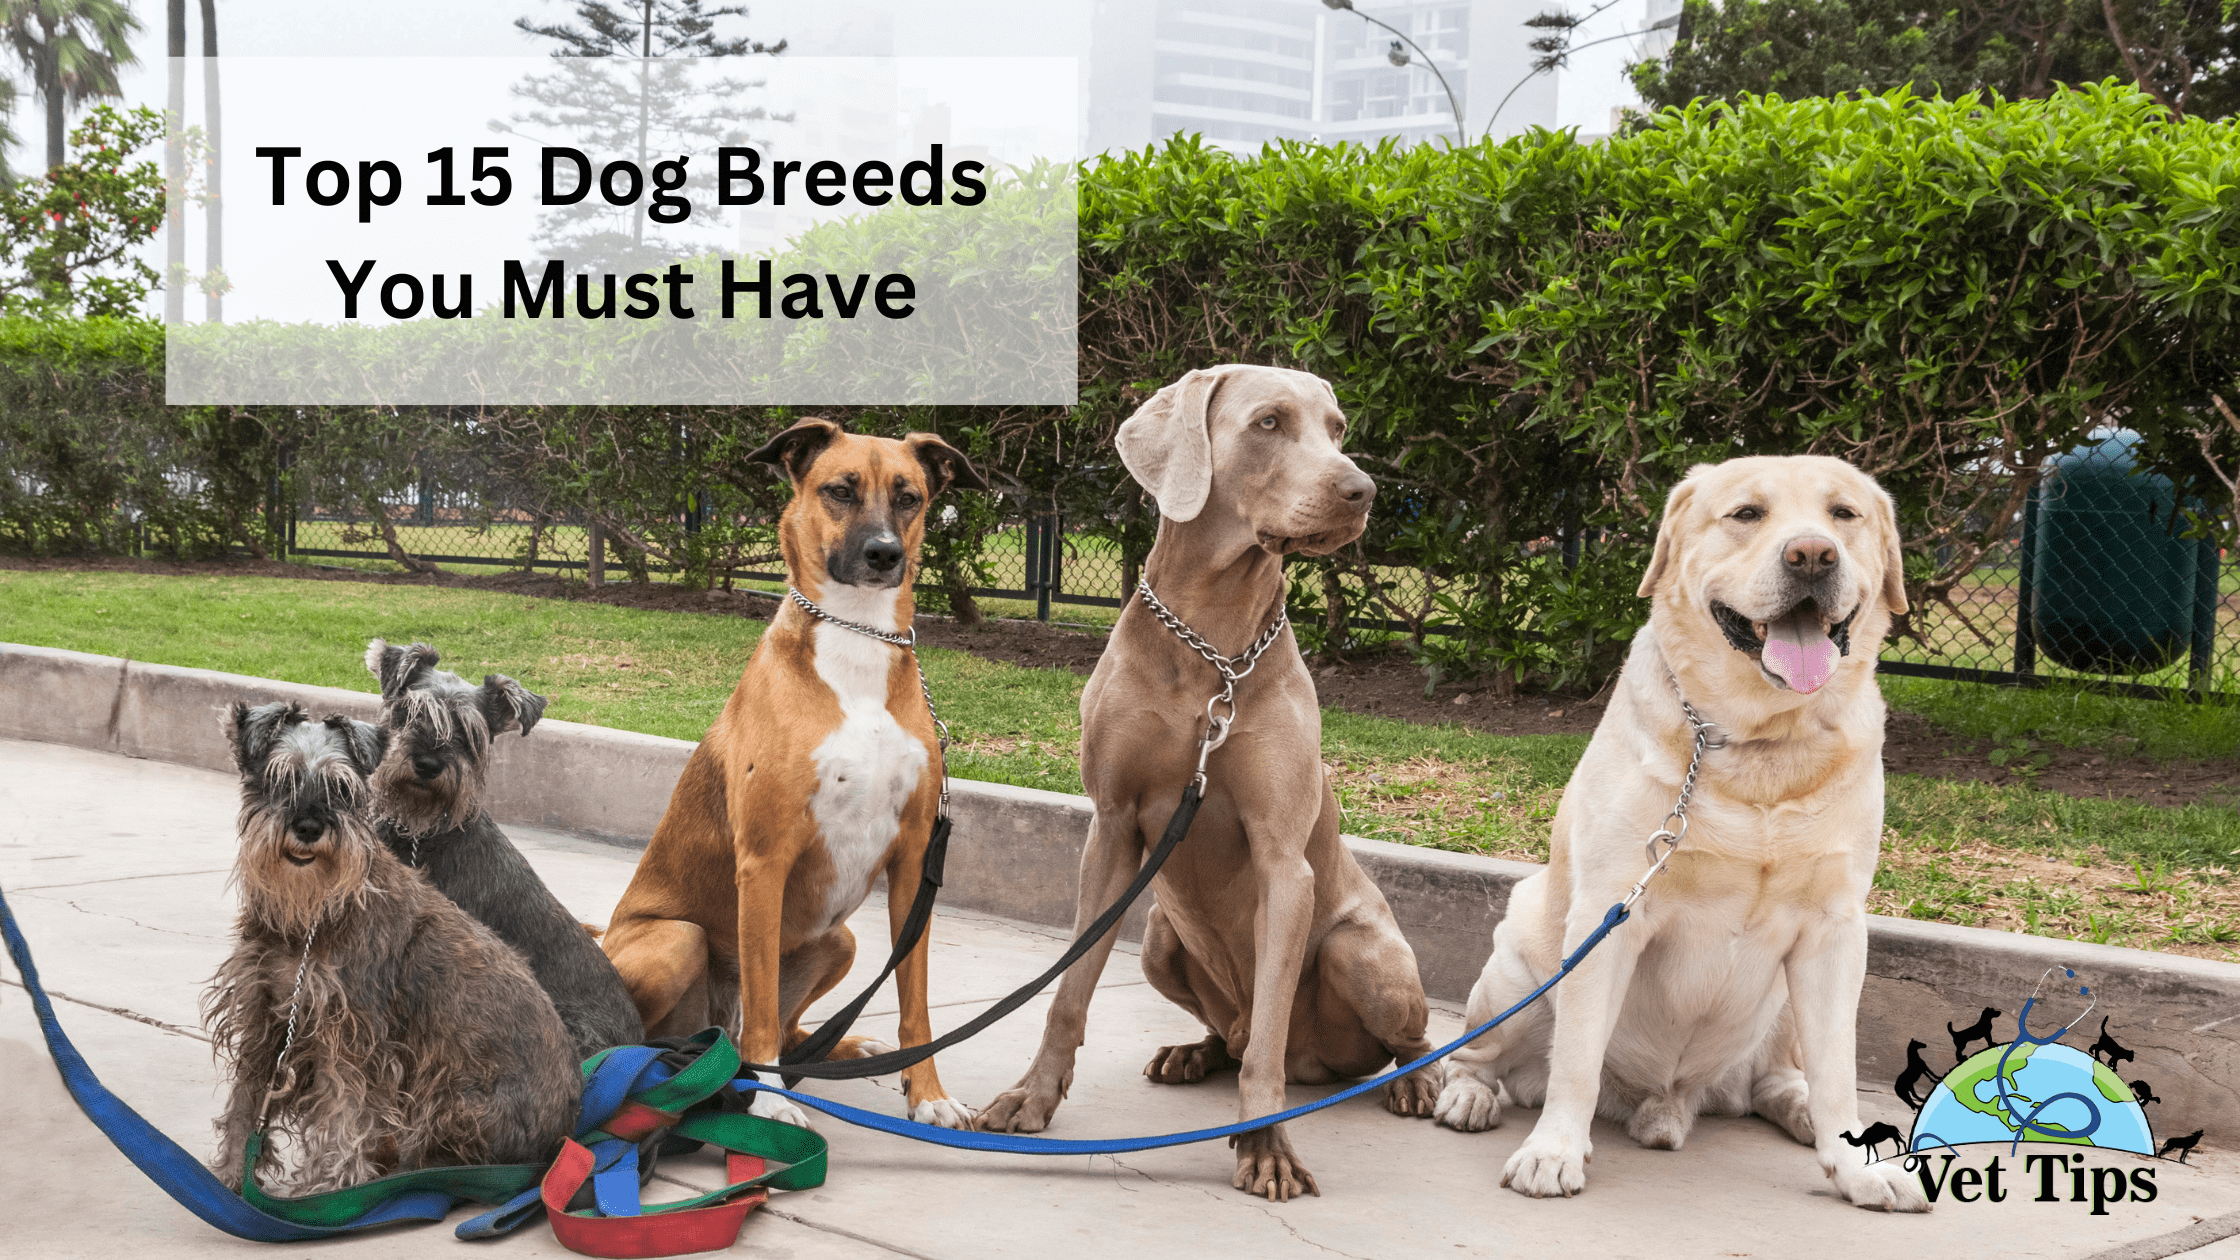 Top 15 Dog Breeds You Must Have